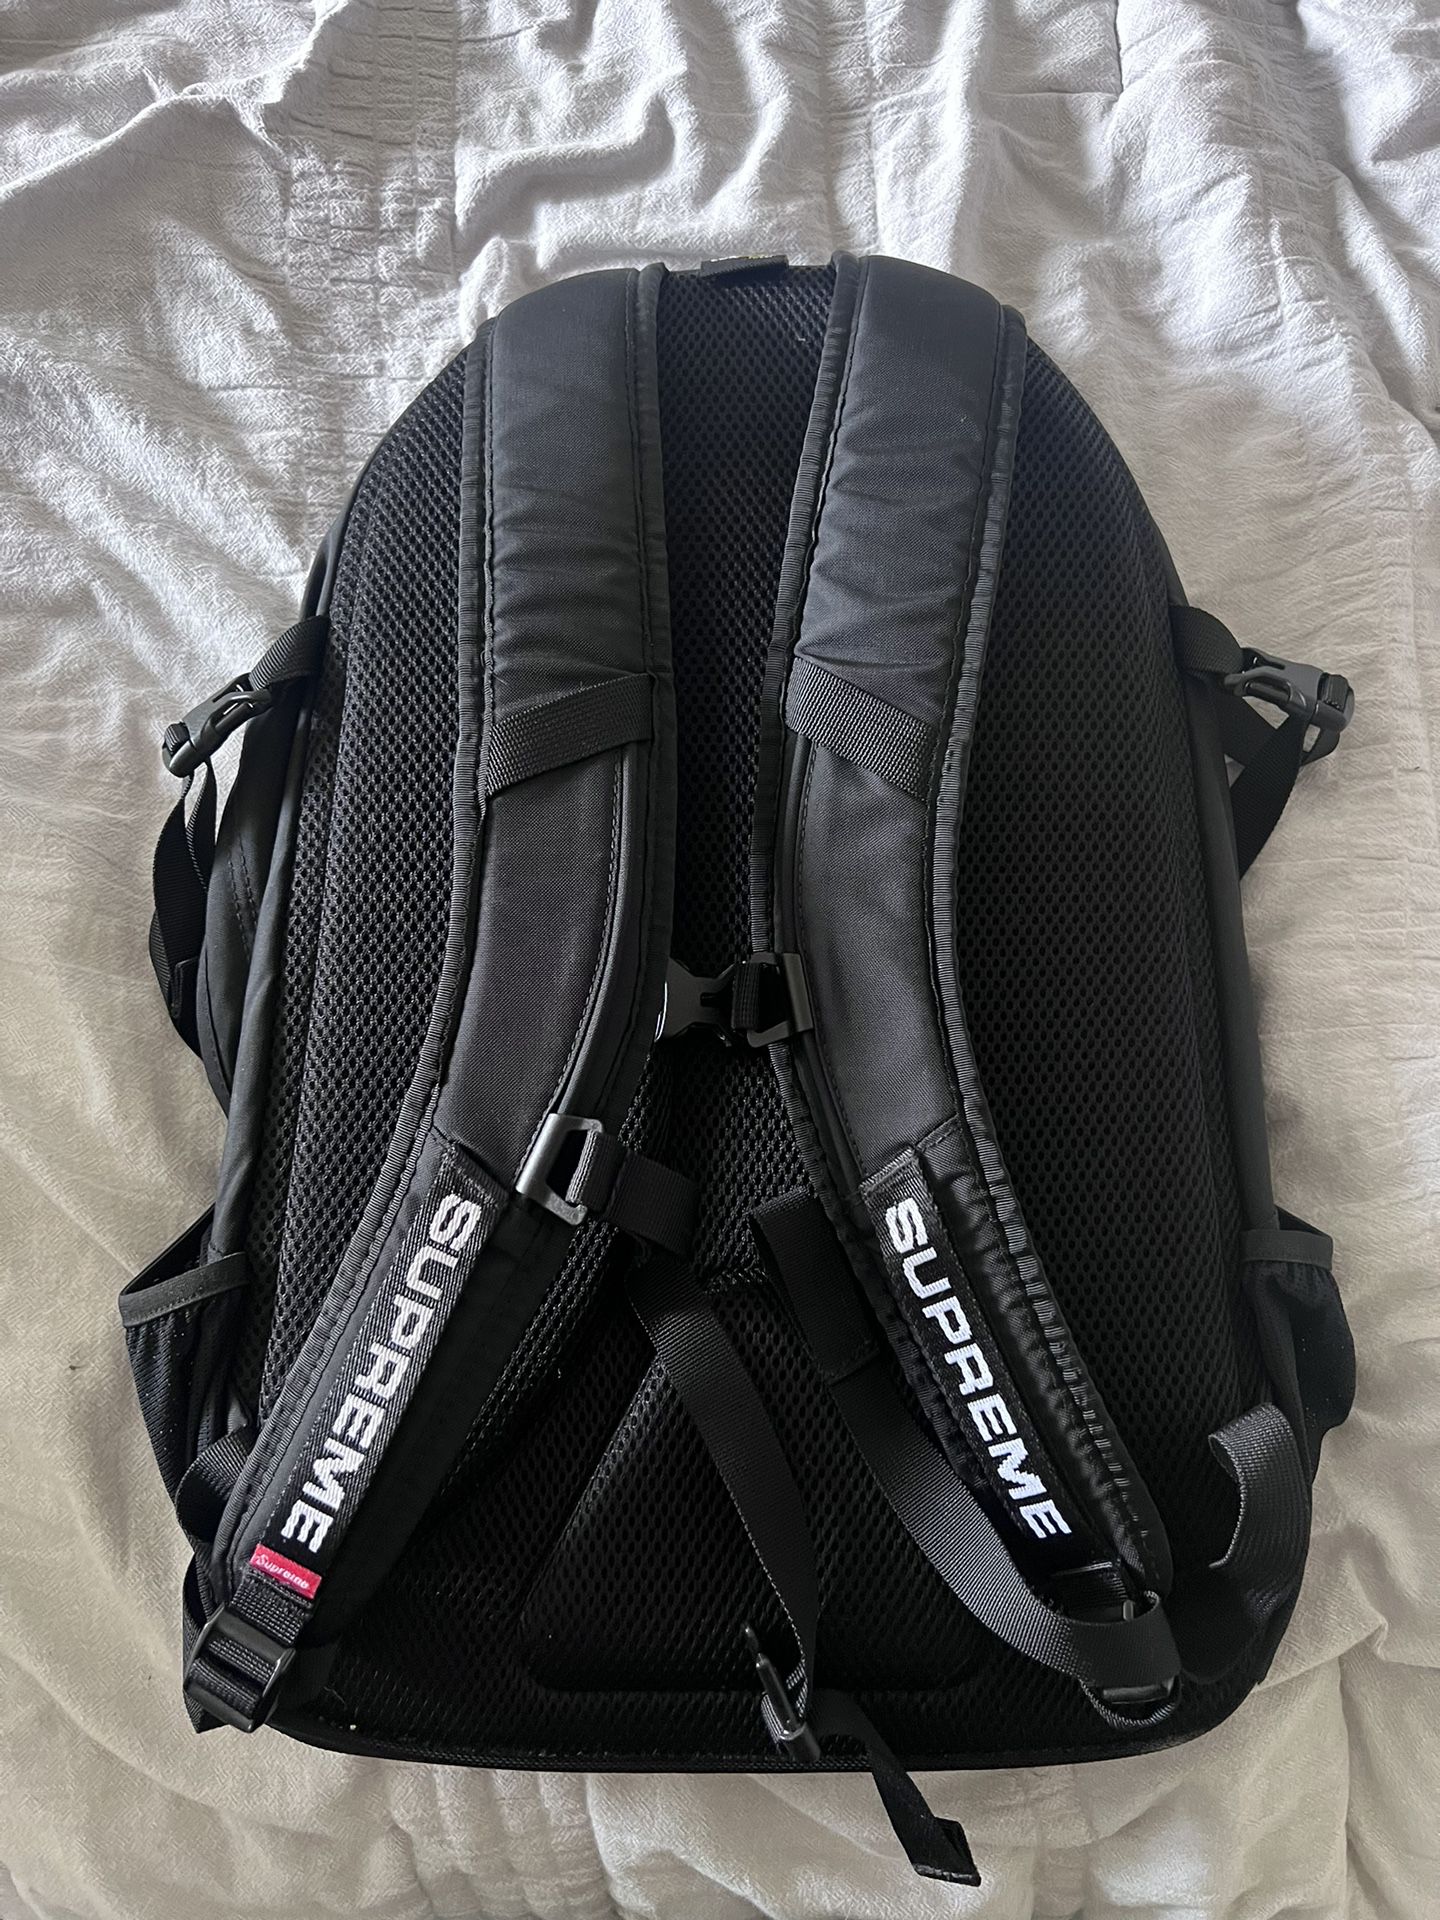 Authentic Supreme Backpack Brand New for Sale in Laguna Hills